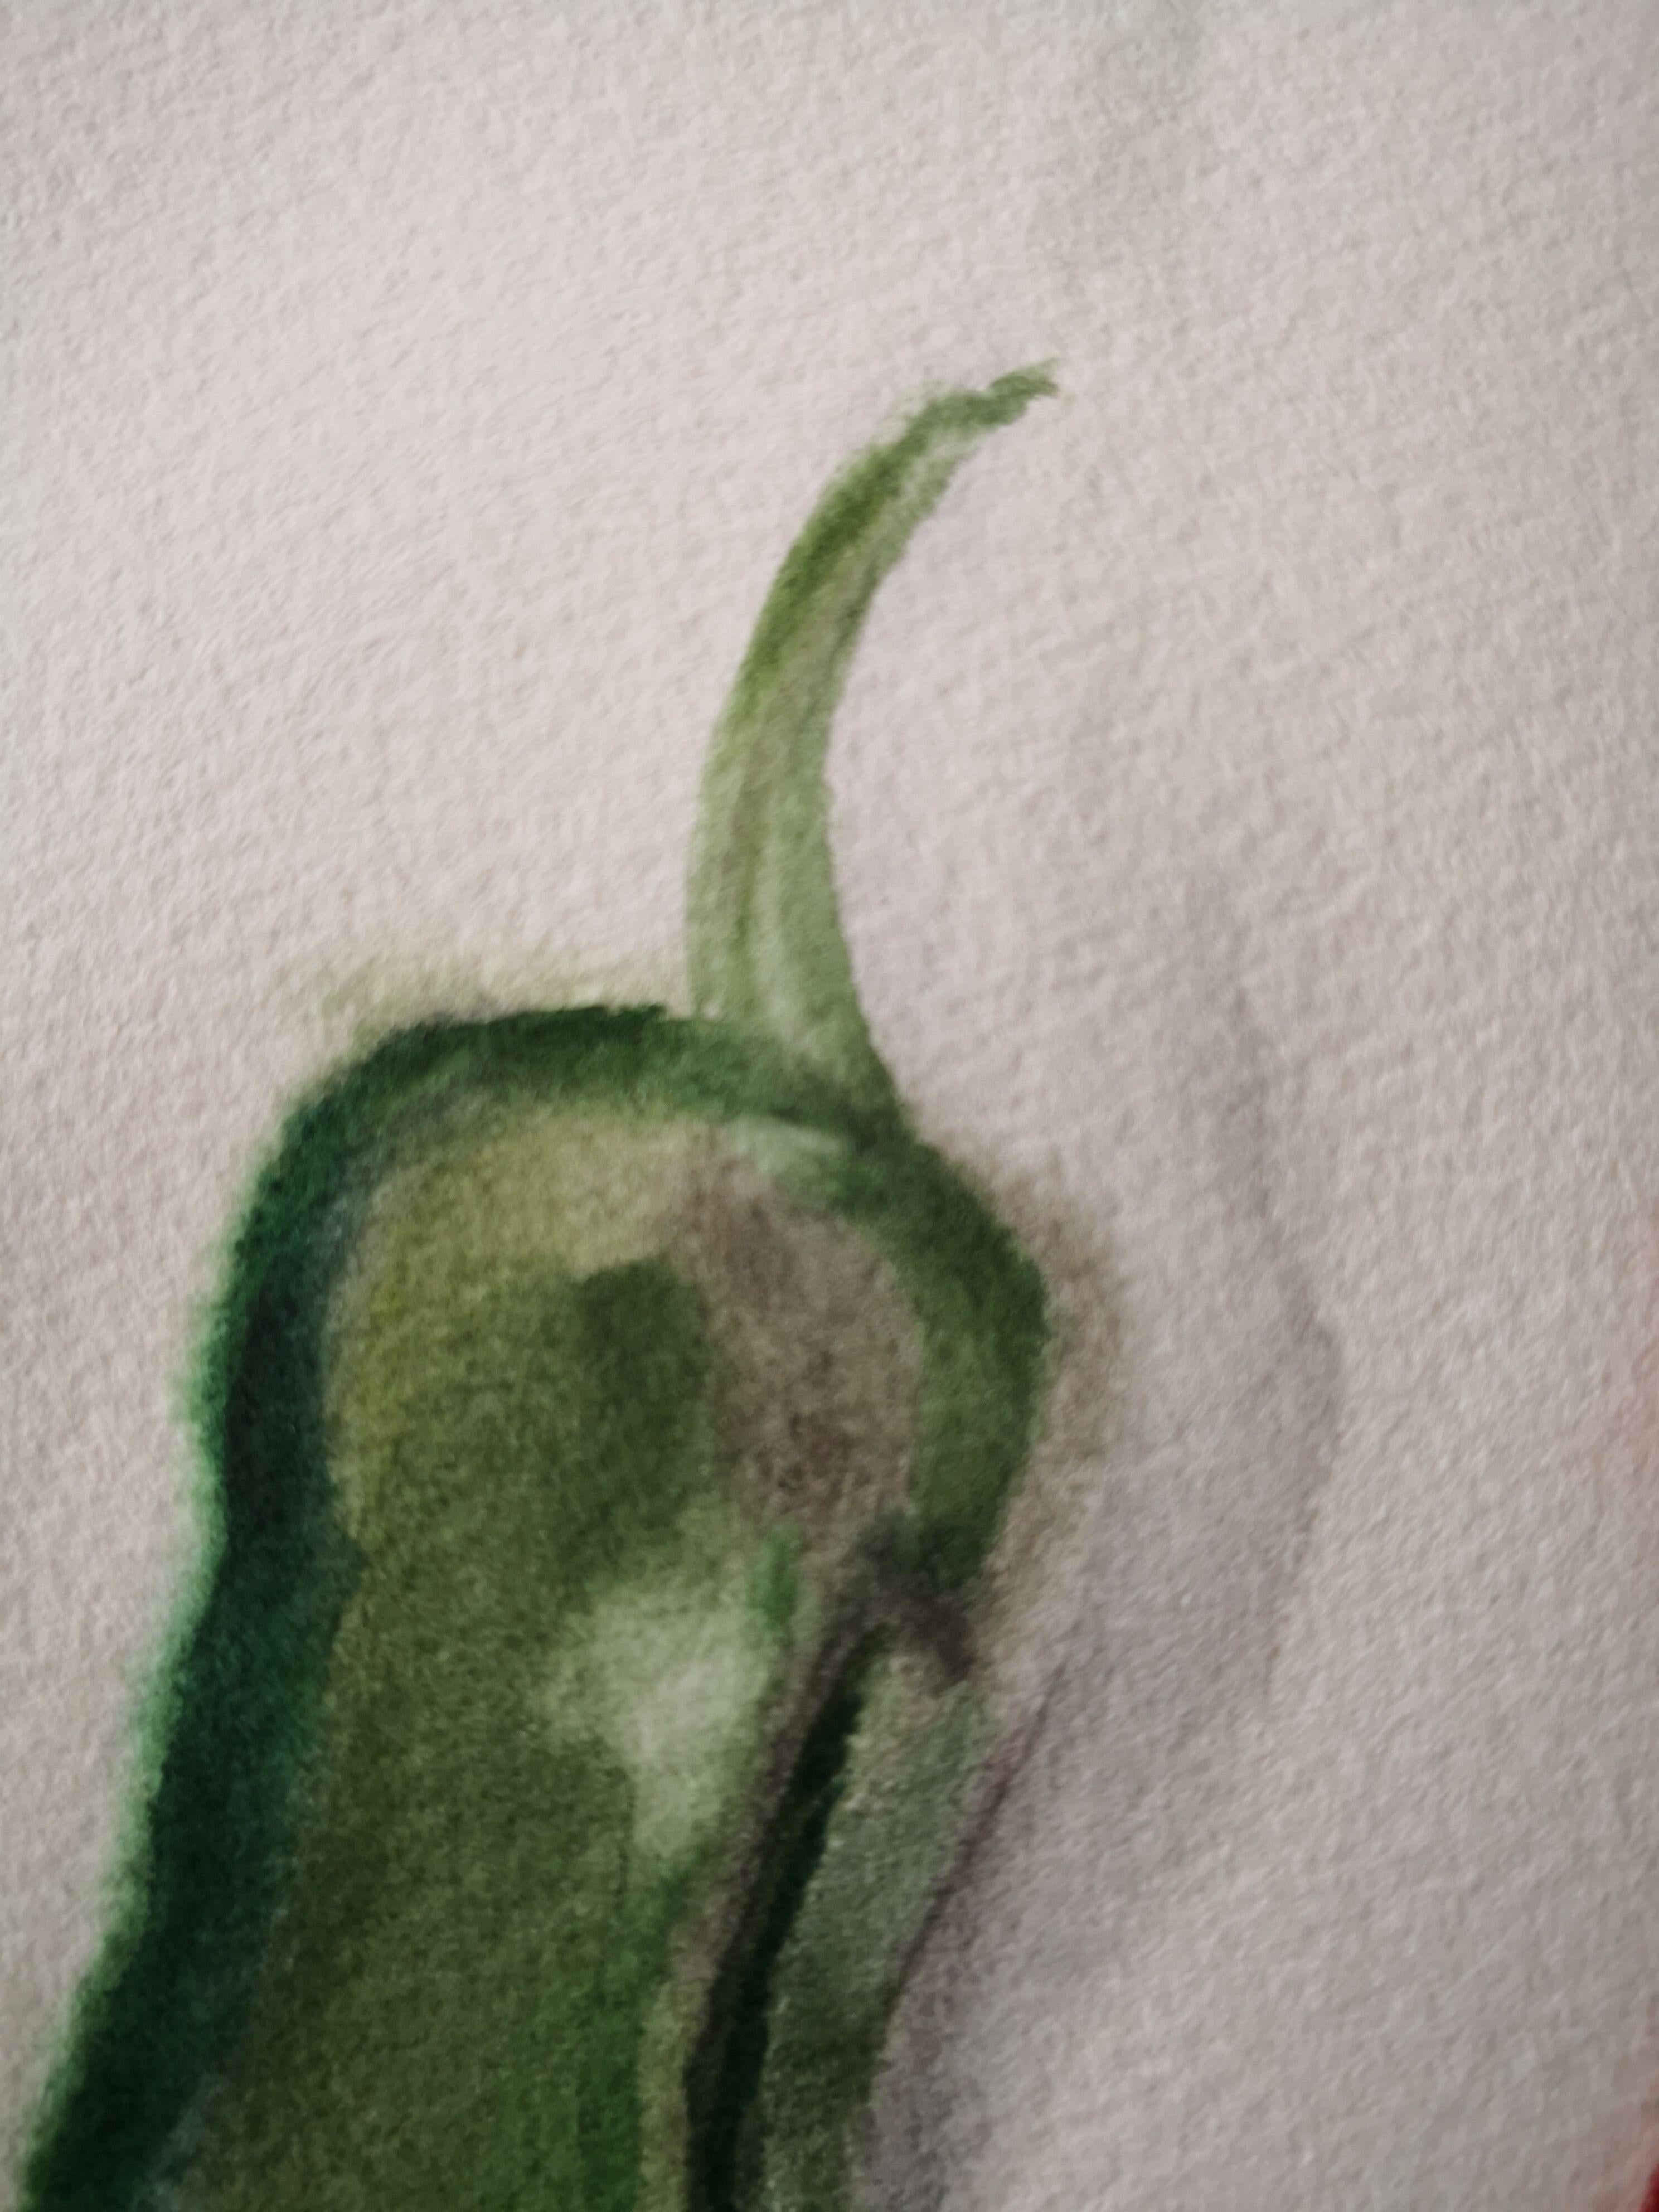 Green and Red Peppers, Painting, Watercolor on Paper - Contemporary Art by Anyck Alvarez Kerloch